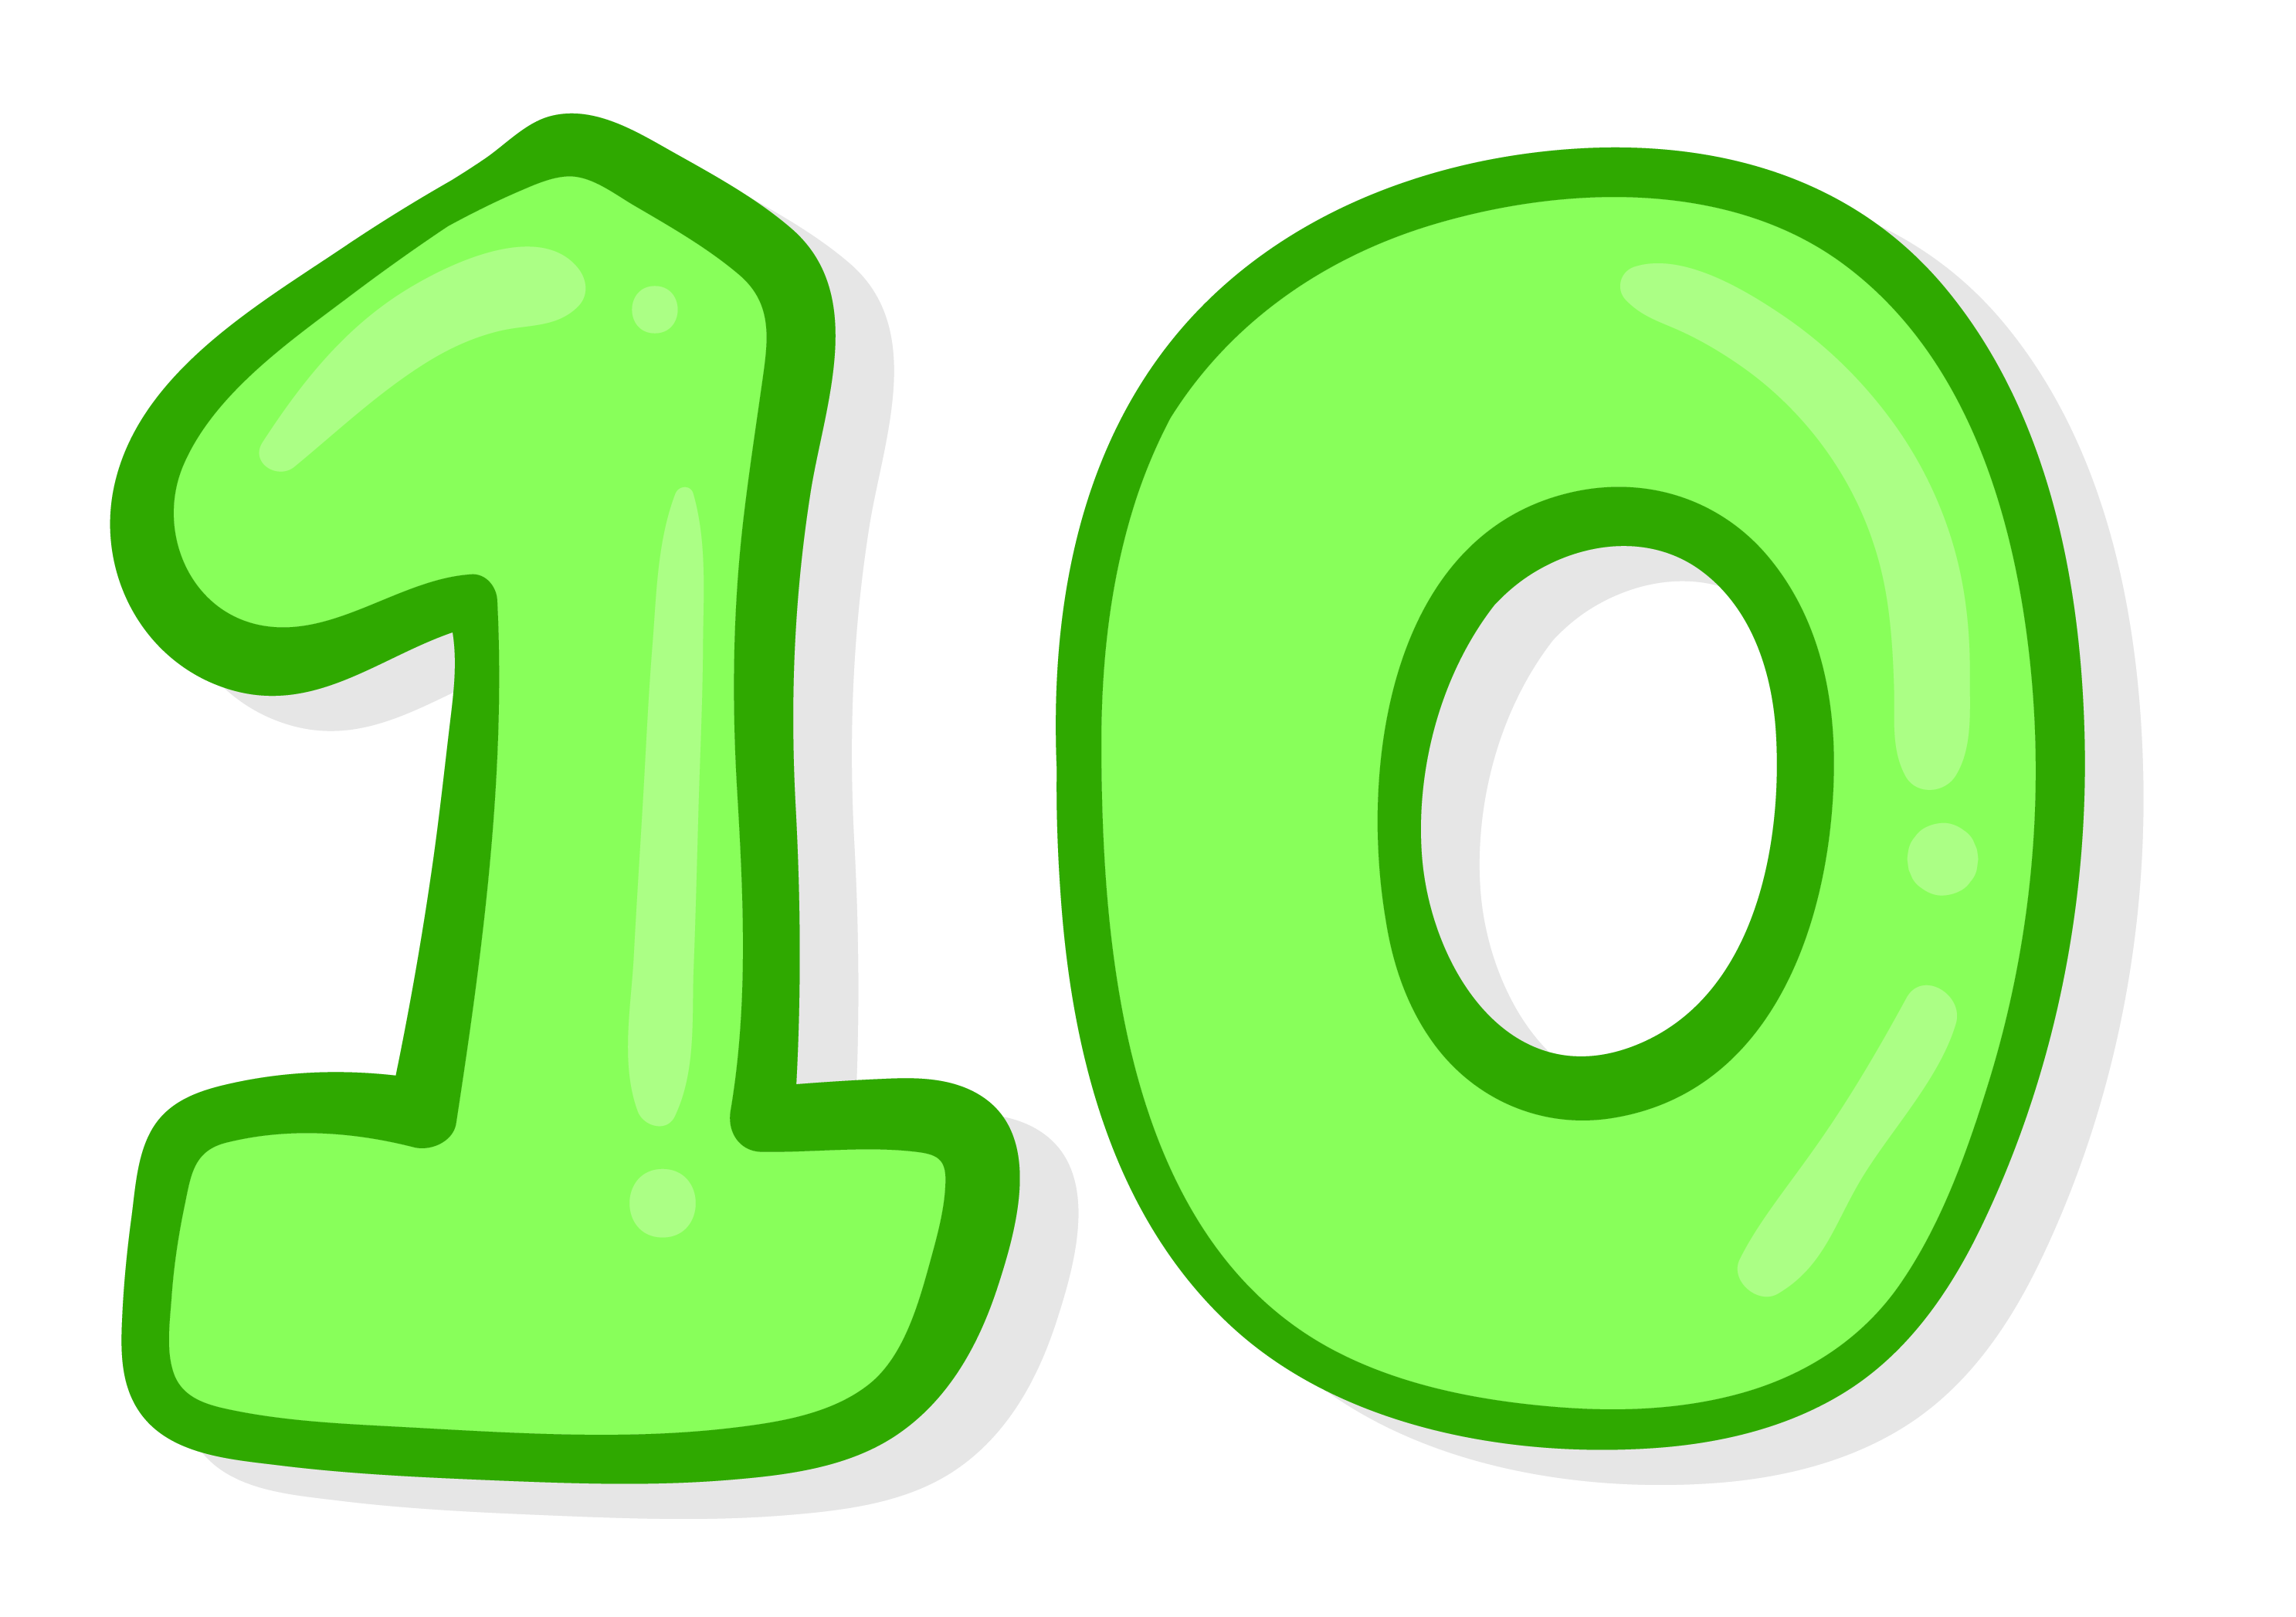 number 10 png